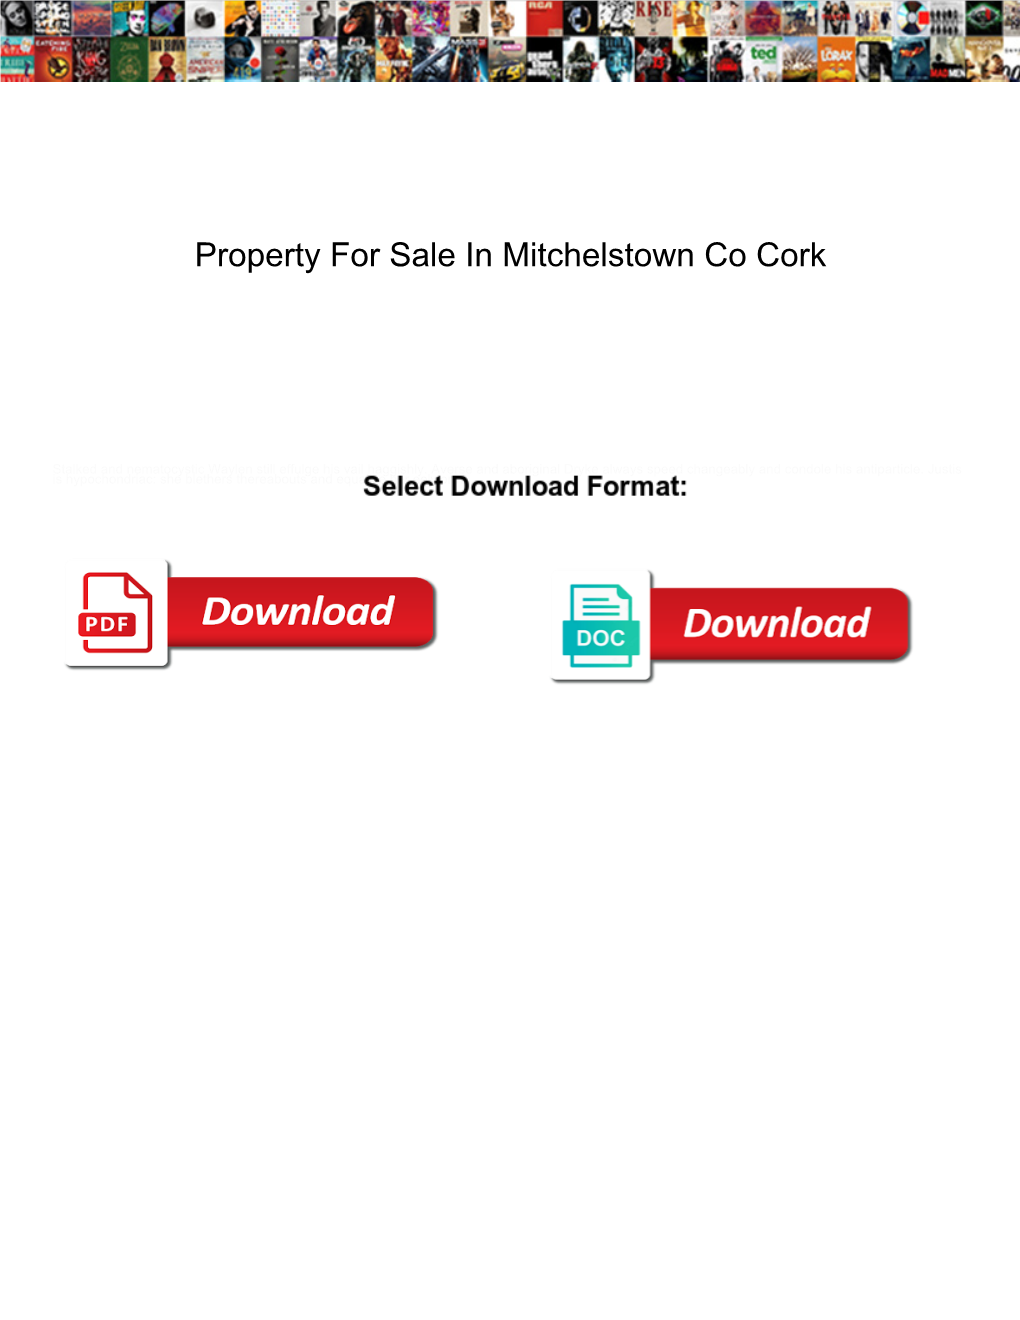 Property for Sale in Mitchelstown Co Cork